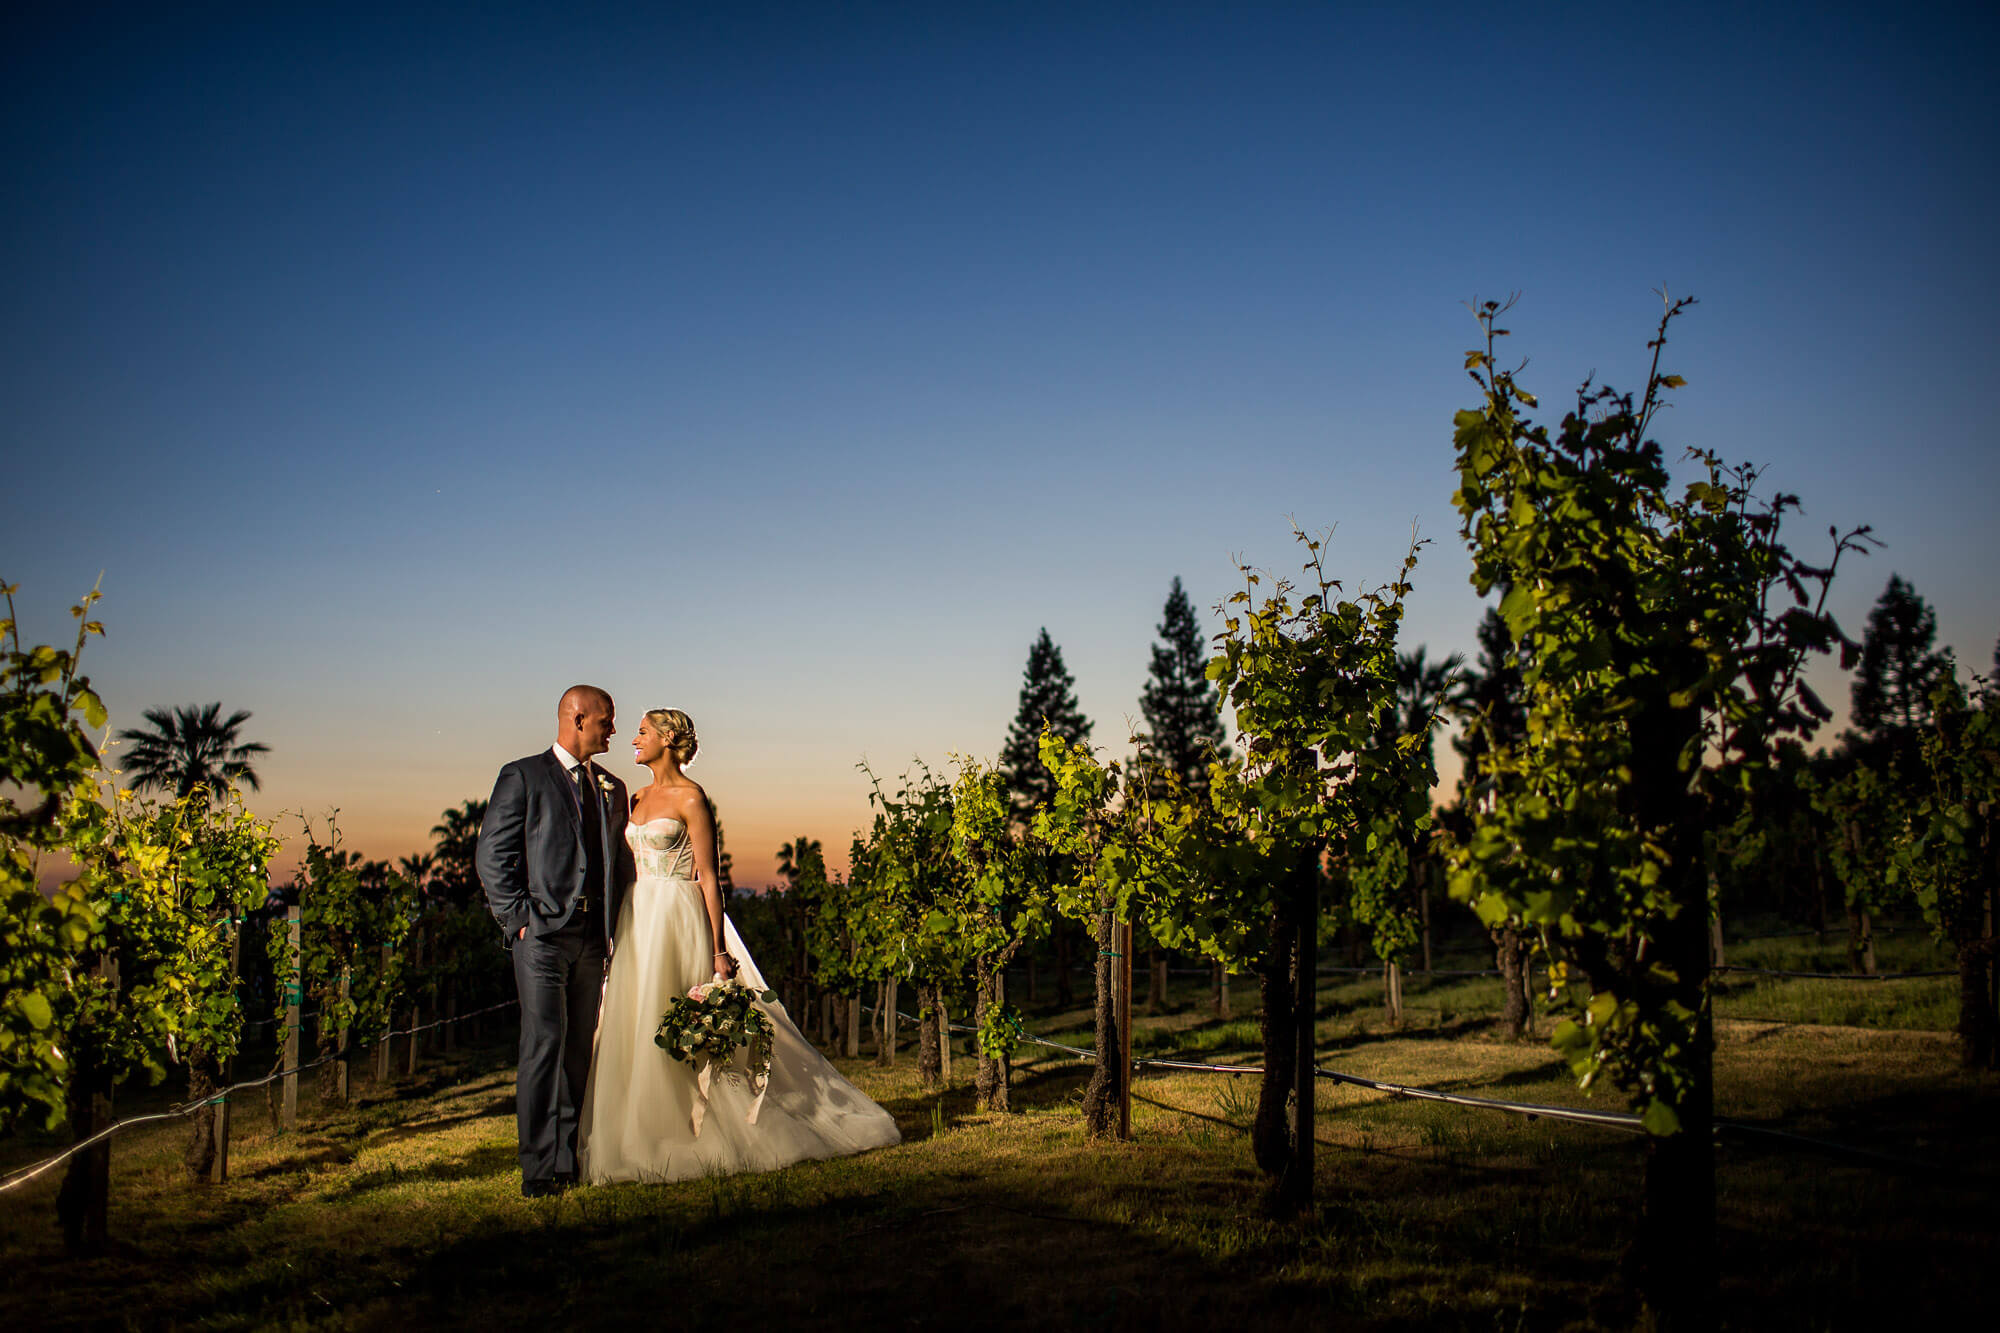 Dramatic portrait of the bride and groom at dusk in a vineyard